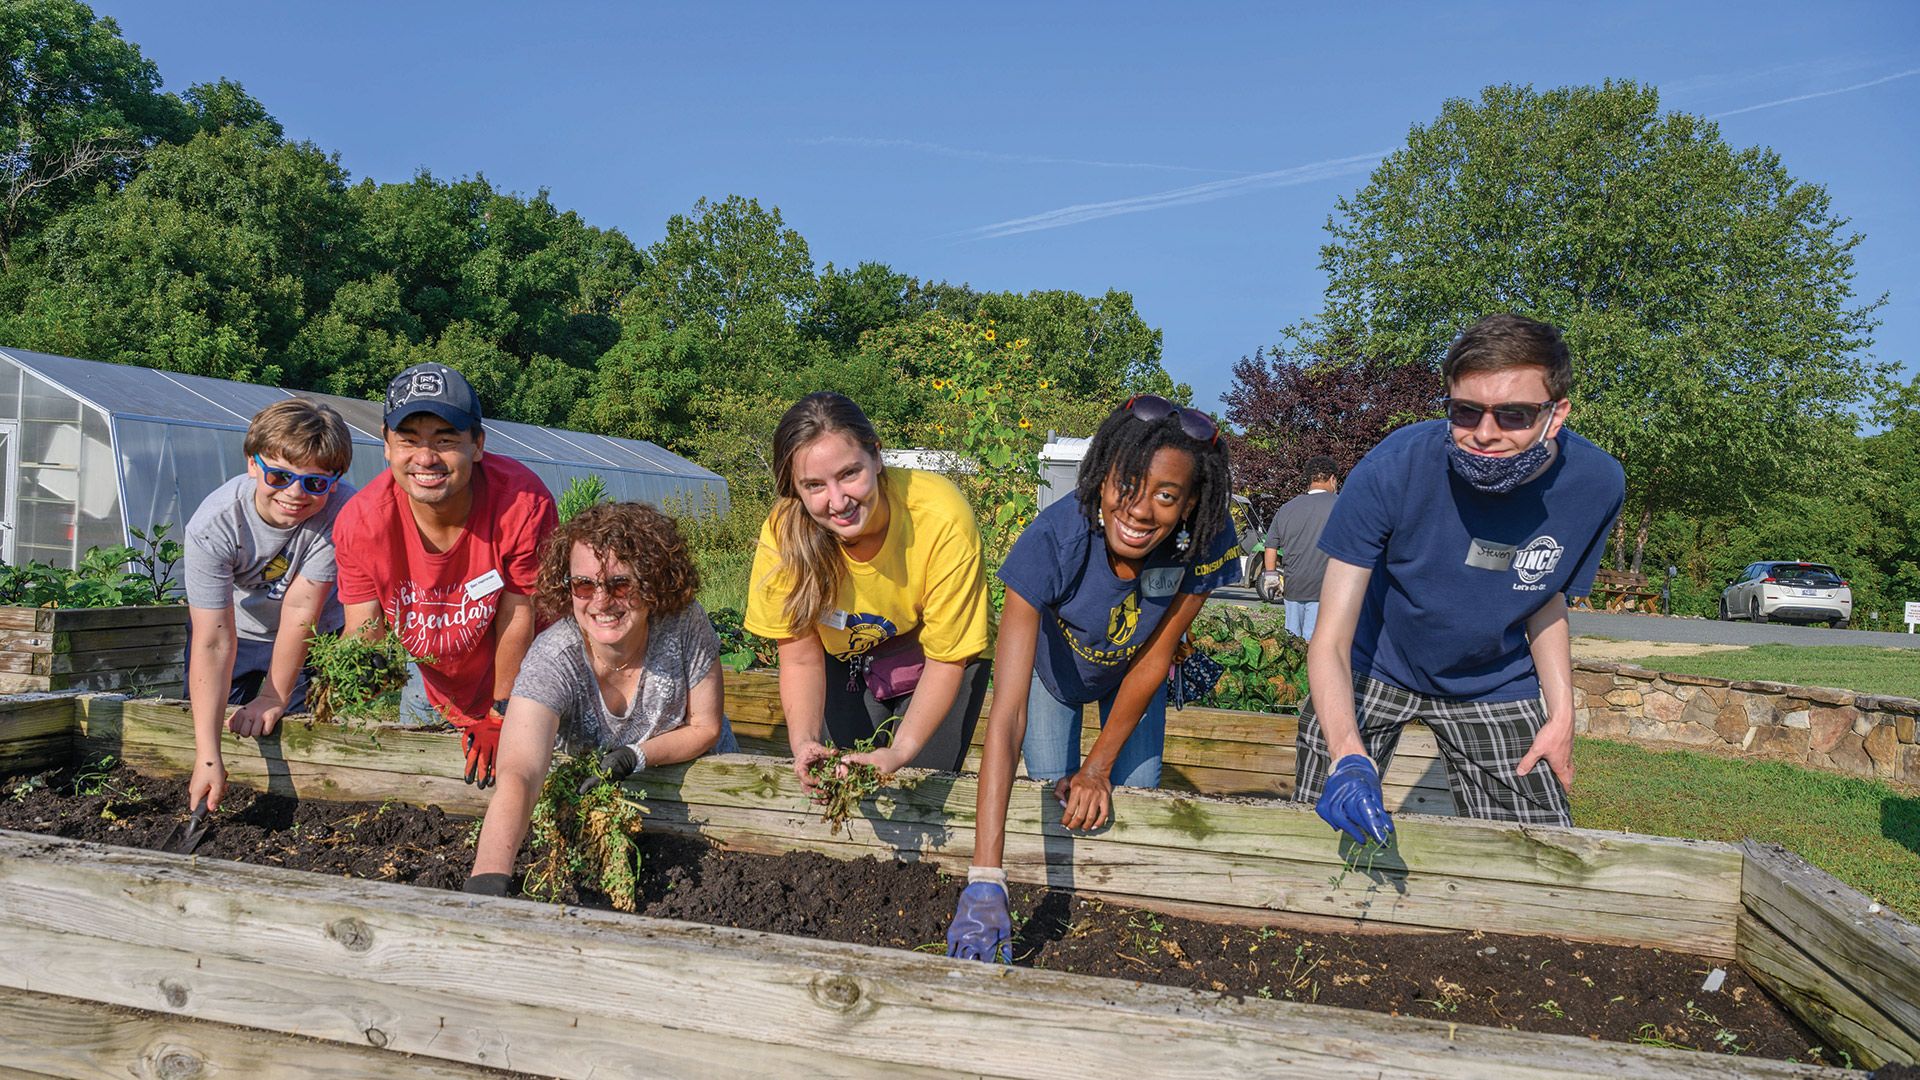 Professor Kim Cuny and students from UNCG's Speaking Center volunteer at Peacehaven Community Farm.